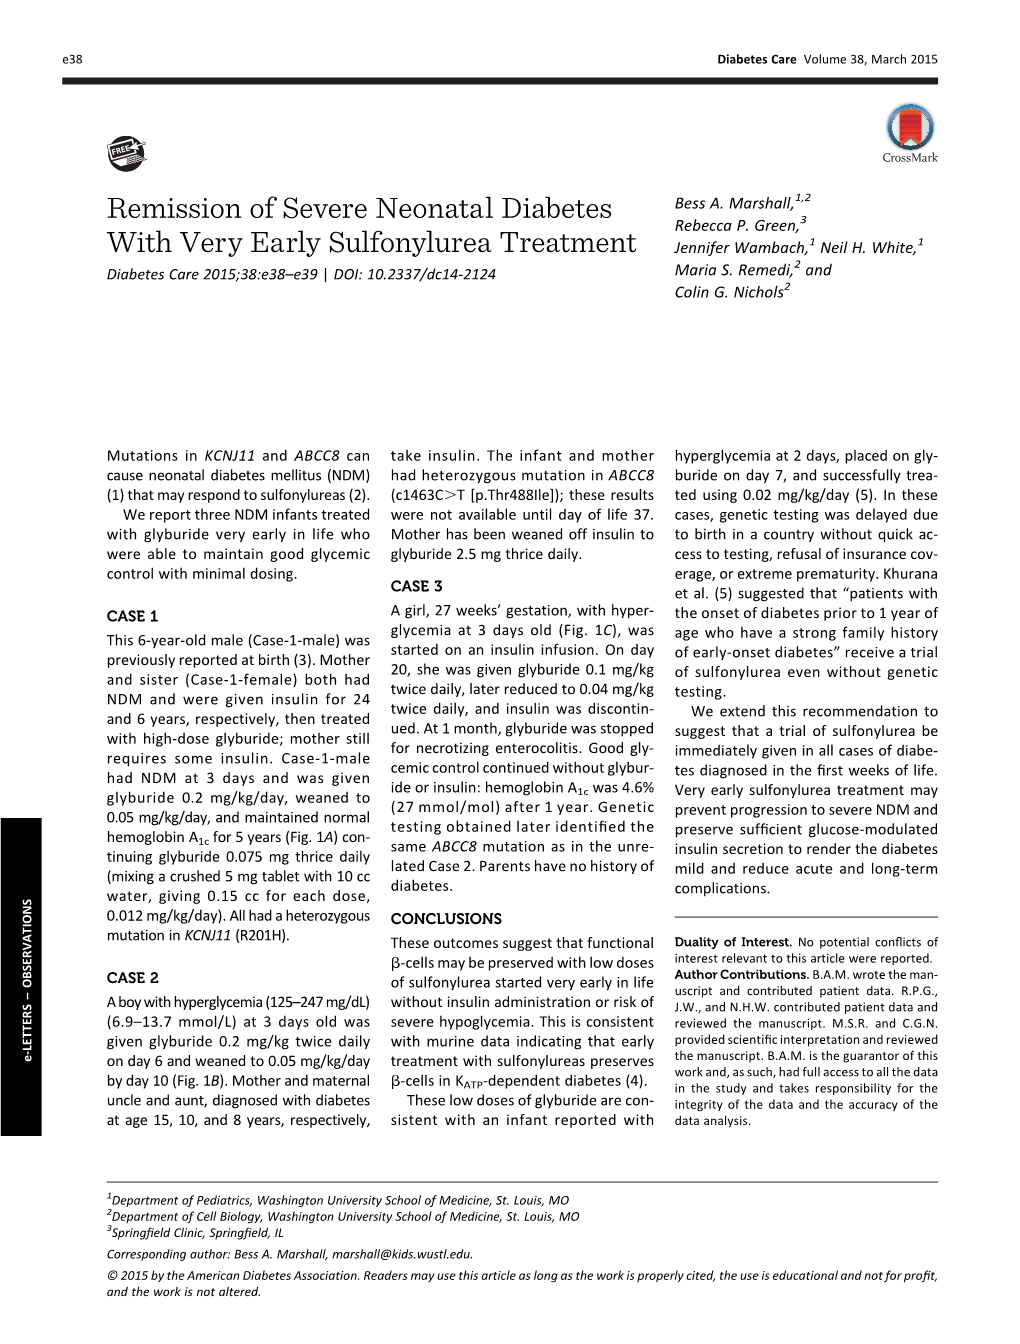 Remission of Severe Neonatal Diabetes with Very Early